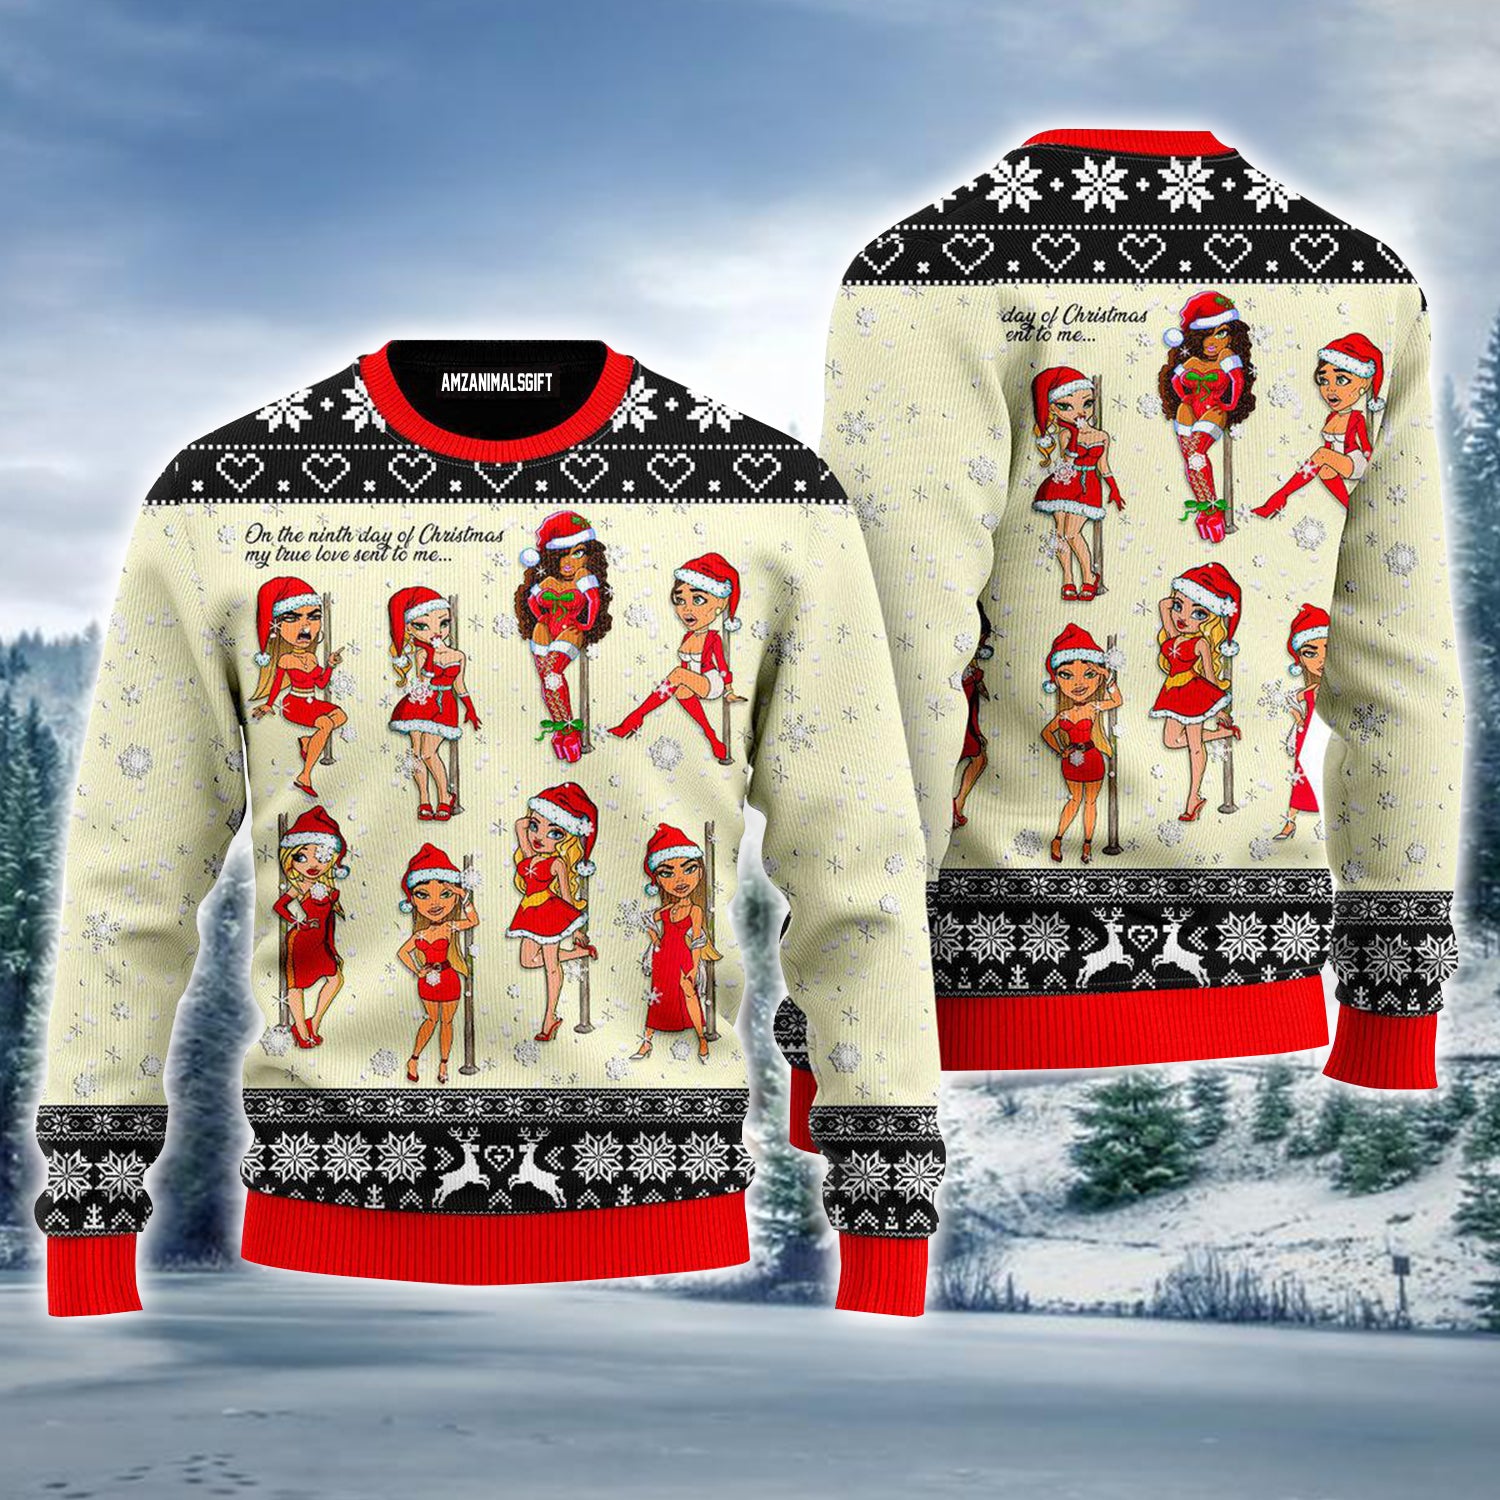 Nine Sweet Santa Ladies Dancing Ugly Christmas Sweater, Ladies Love Xmas Ugly Sweater For Men & Women - Perfect Gift For Christmas, Family, Friends